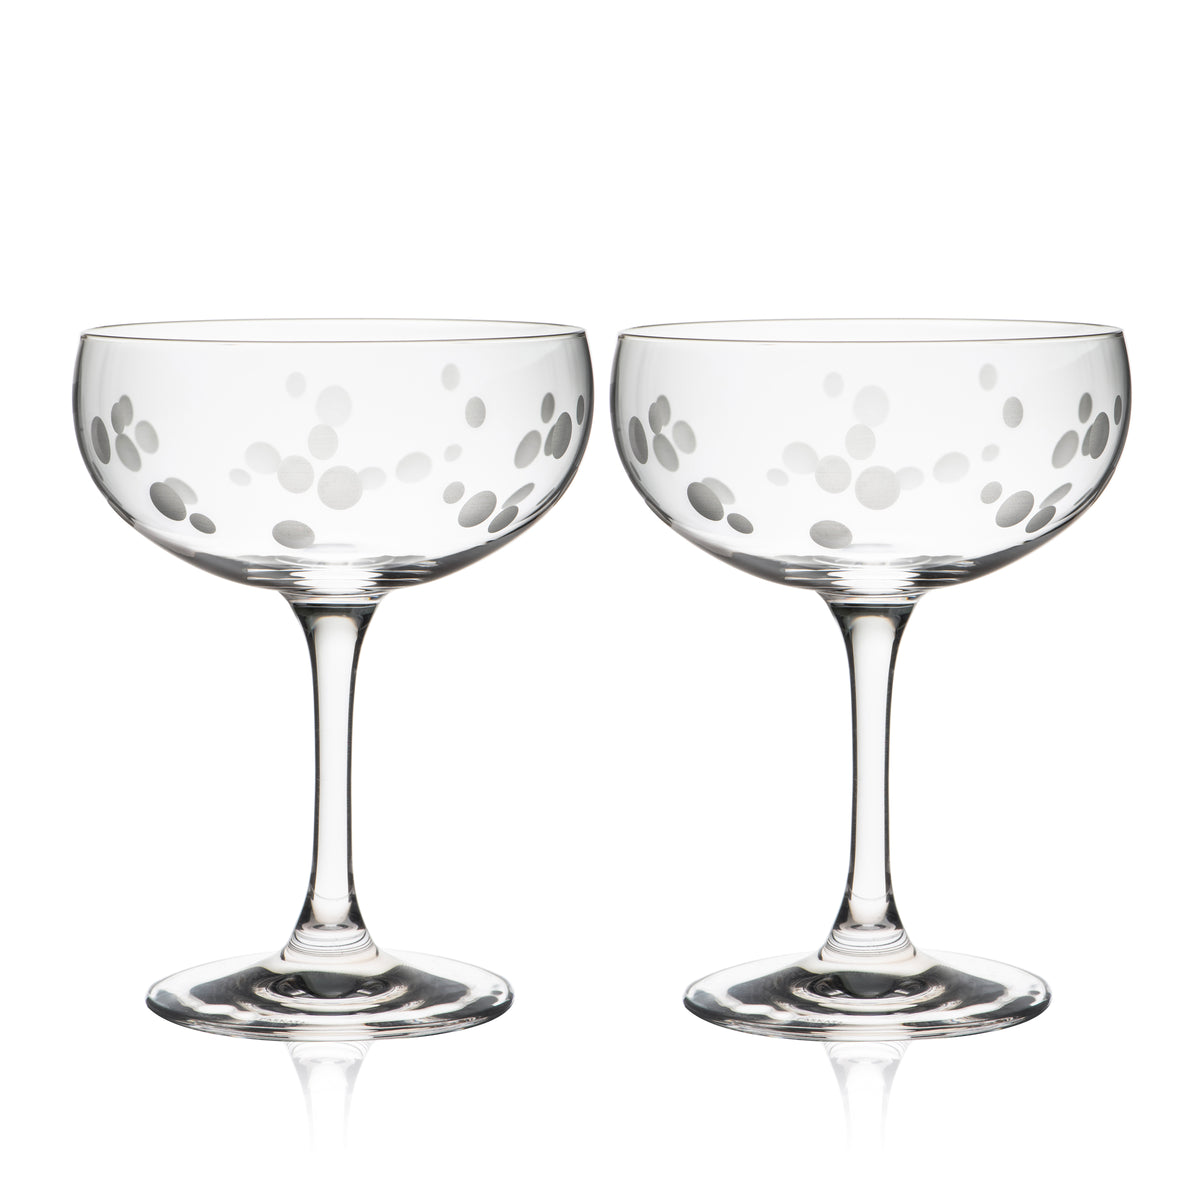 A Chatham Pop etched coupe cocktail glasses by Caskata with glass marbles.